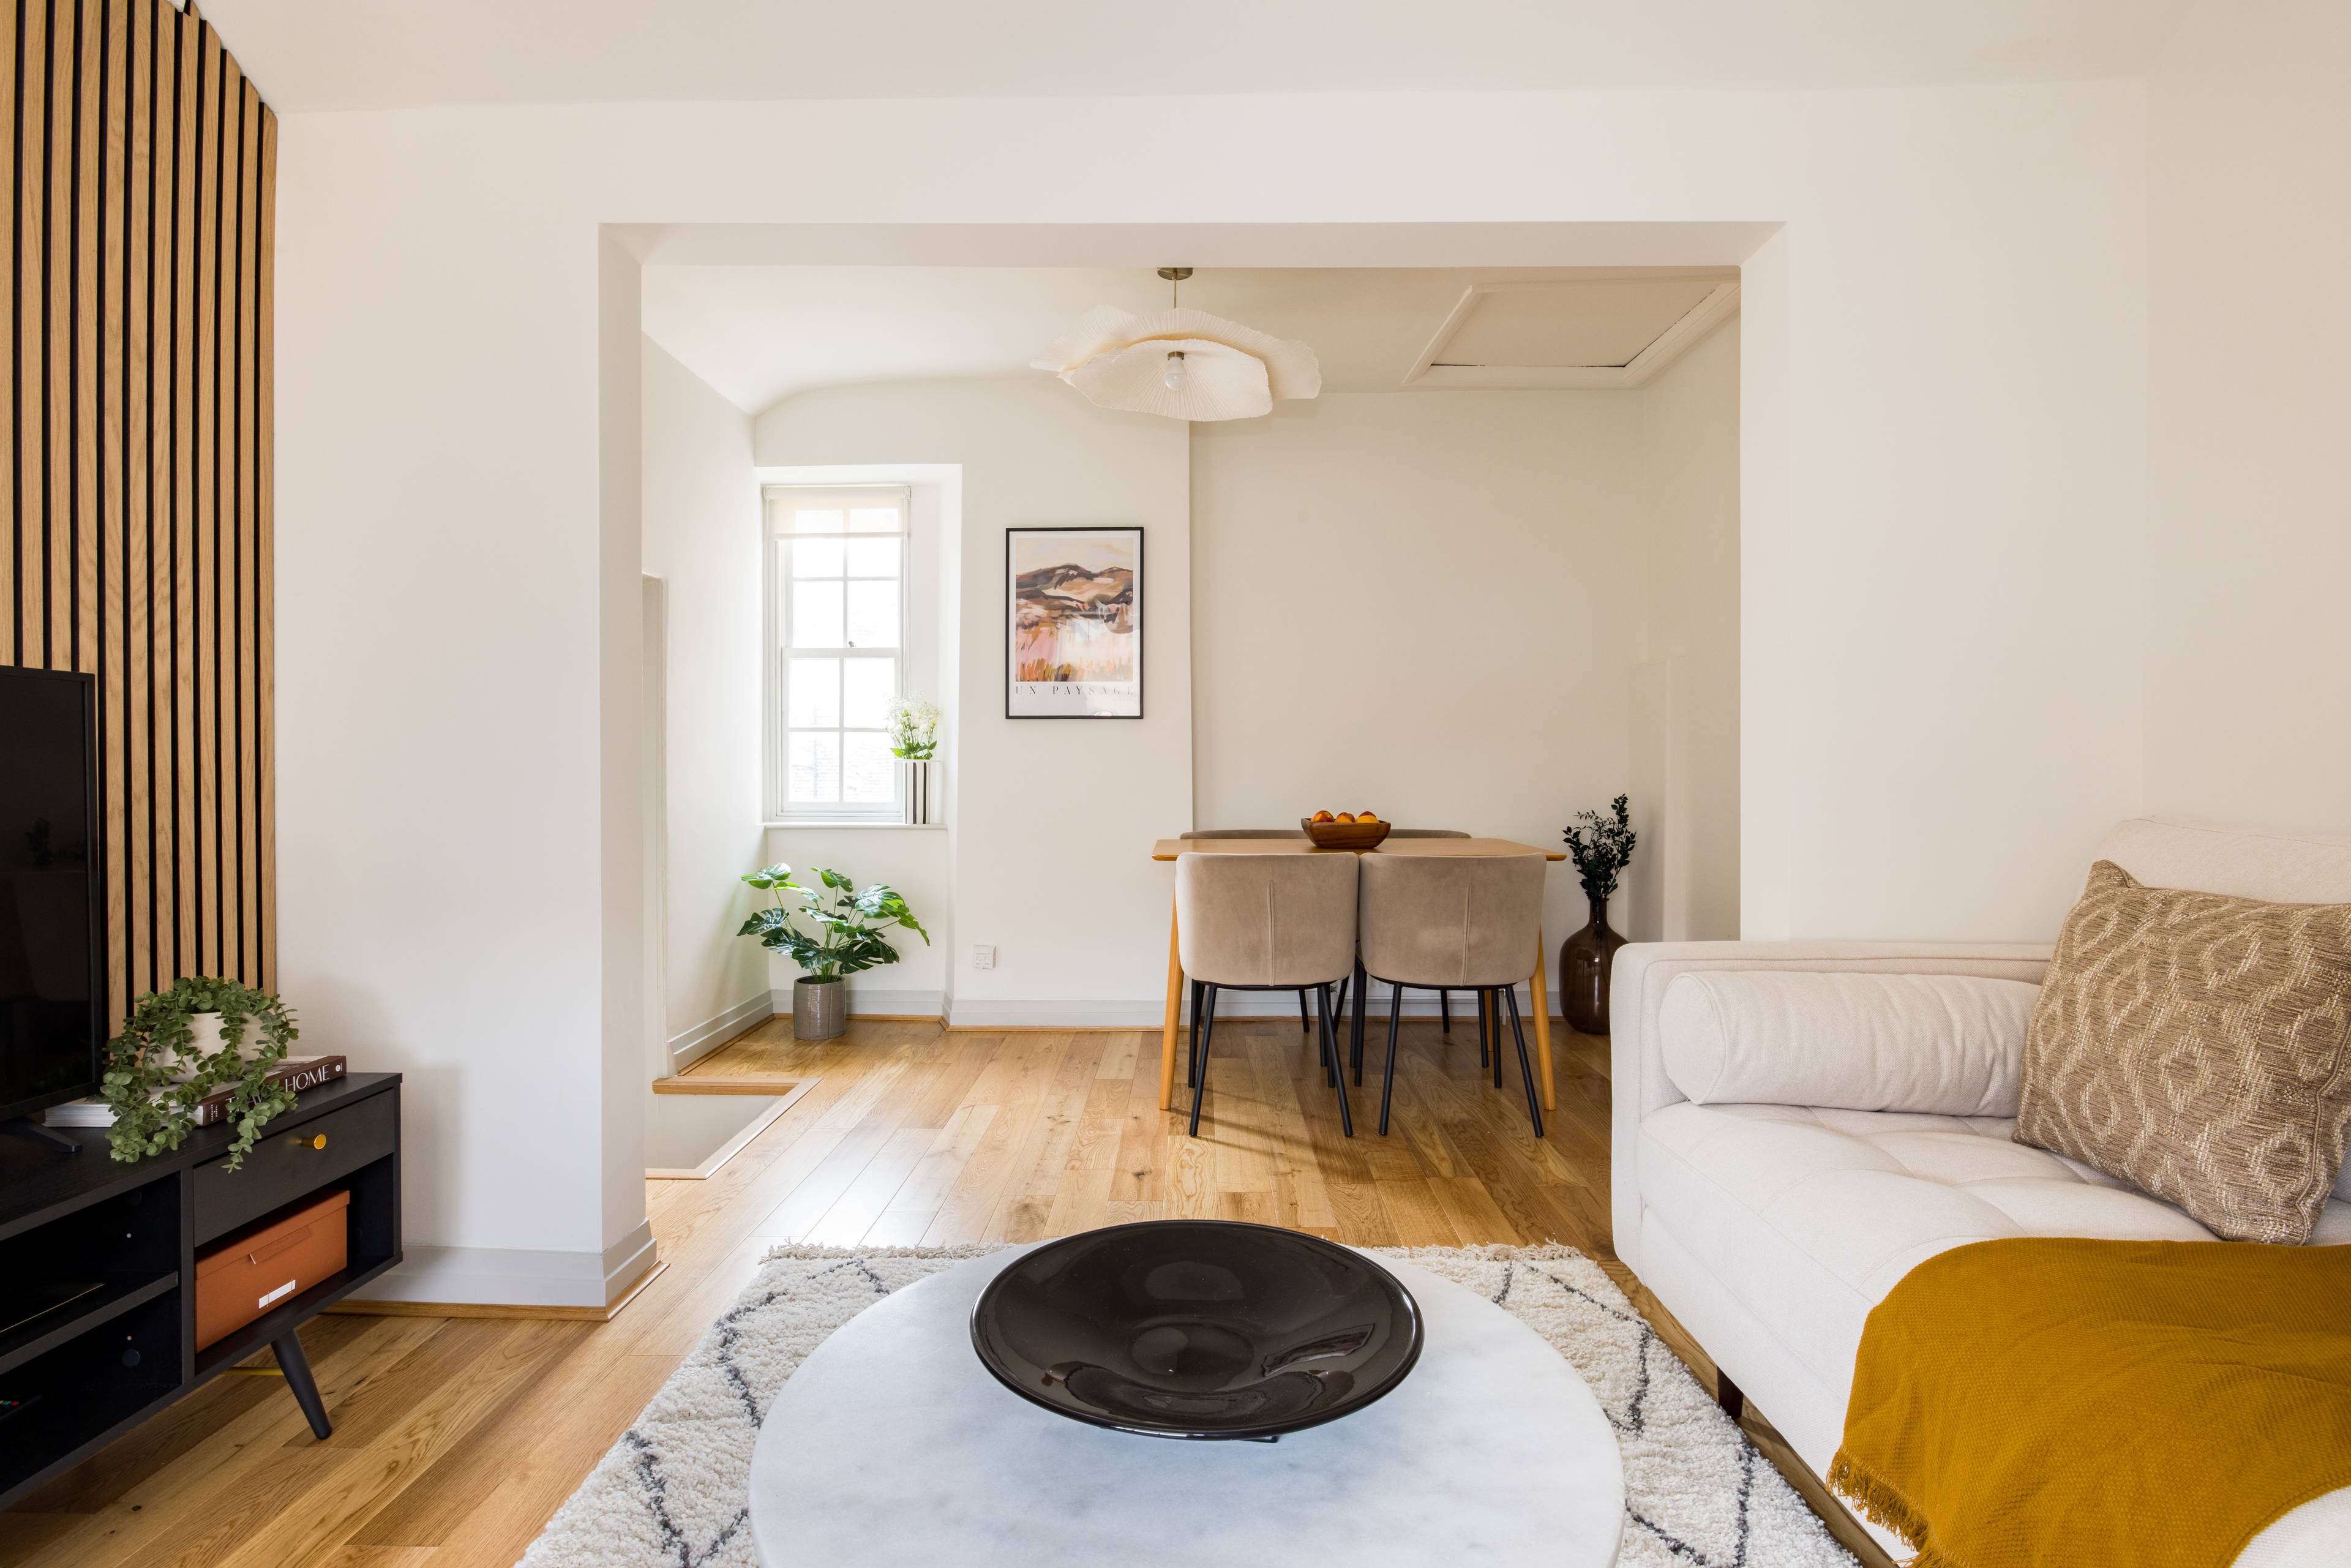 Interior-designed and newly refurbished 3-bedroom flat in the heart of Paddington, with excellent transport links